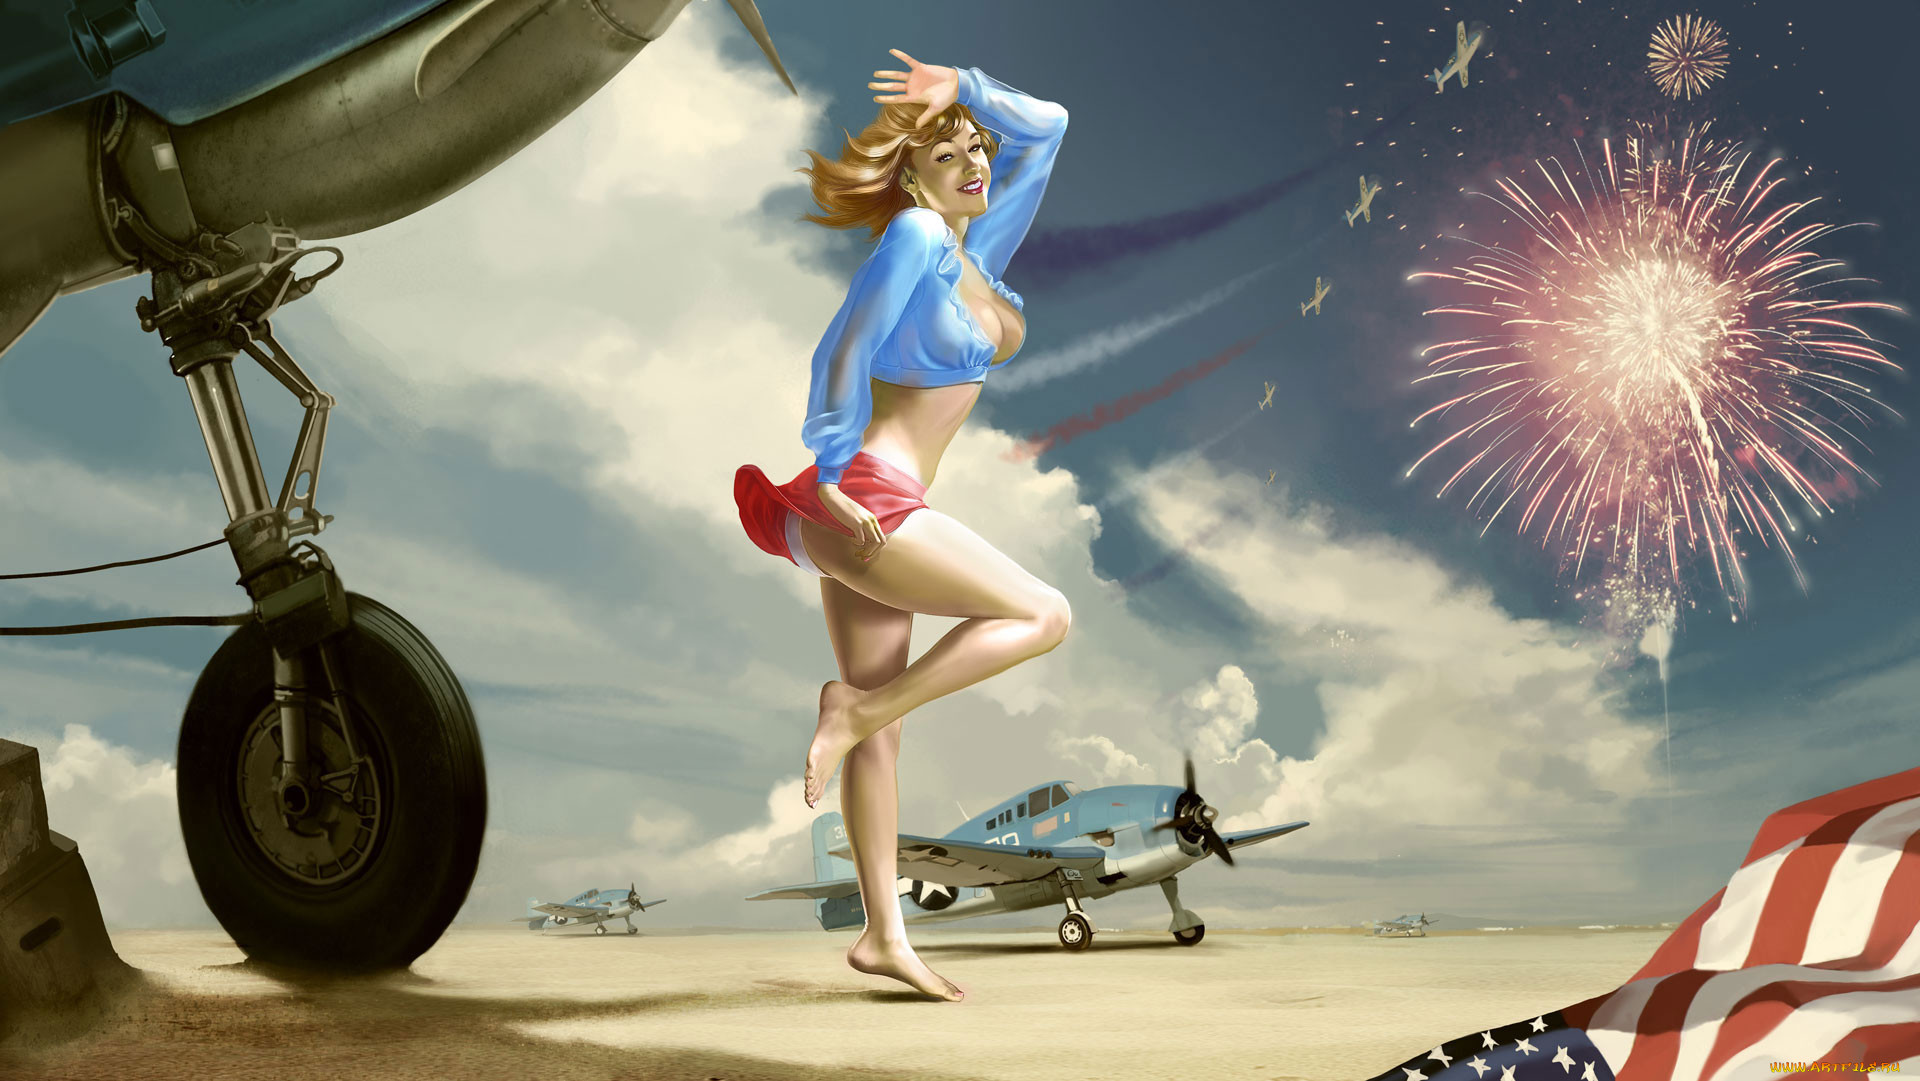 General 1920x1081 ass pinup models vehicle aircraft women American flag fireworks barefoot arms up smiling